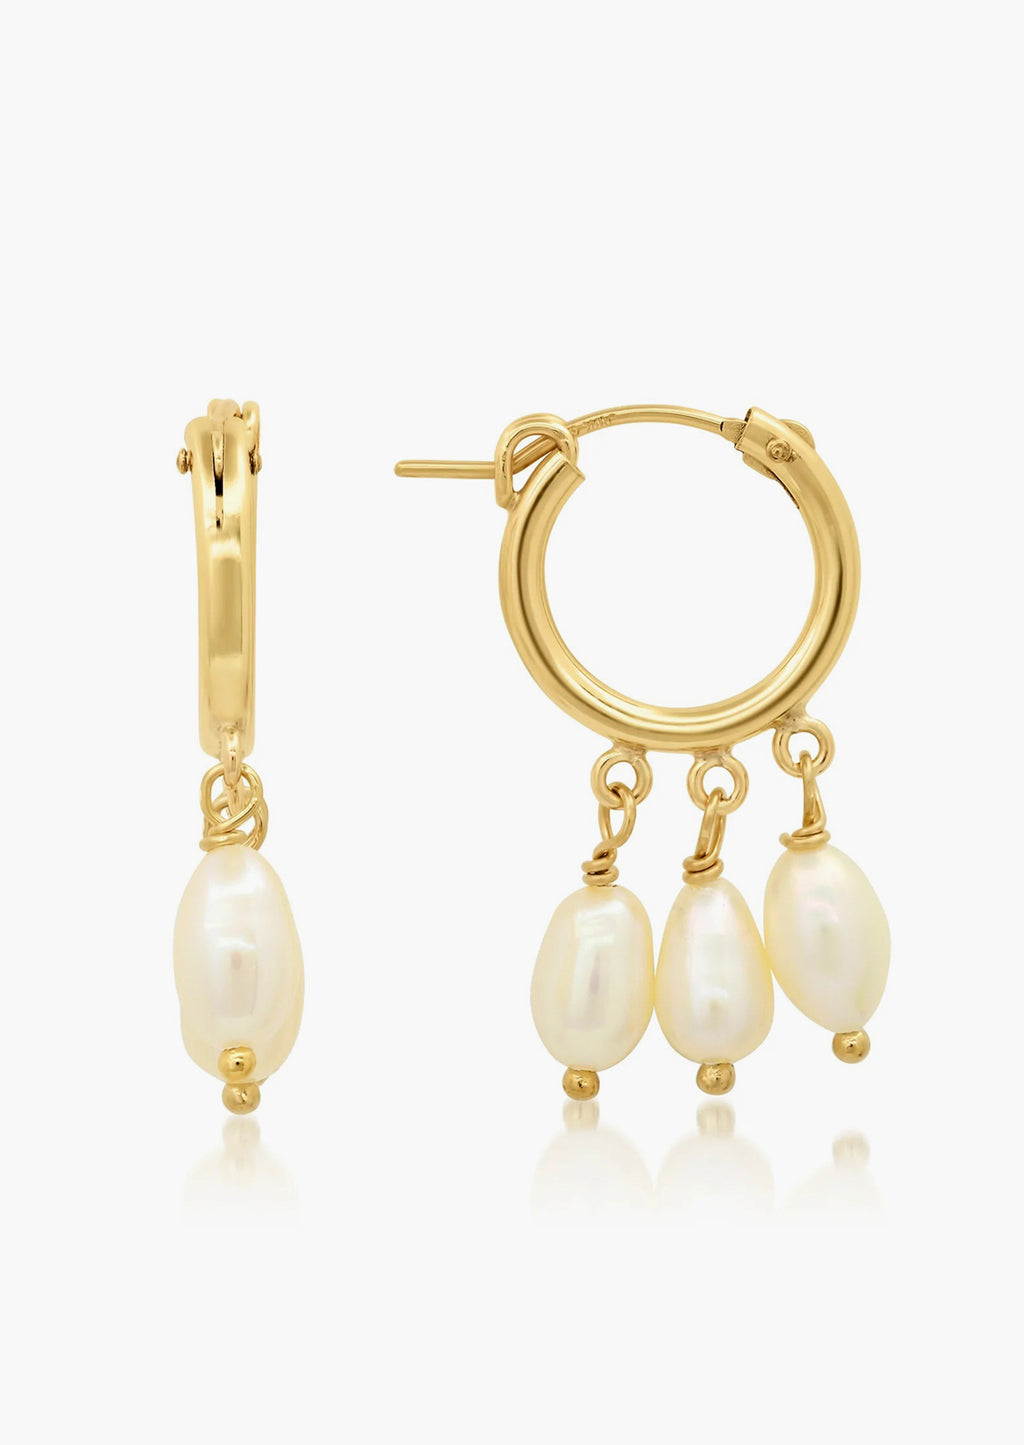 2: A pair of gold hoop earrings with three dangling pearls on each.